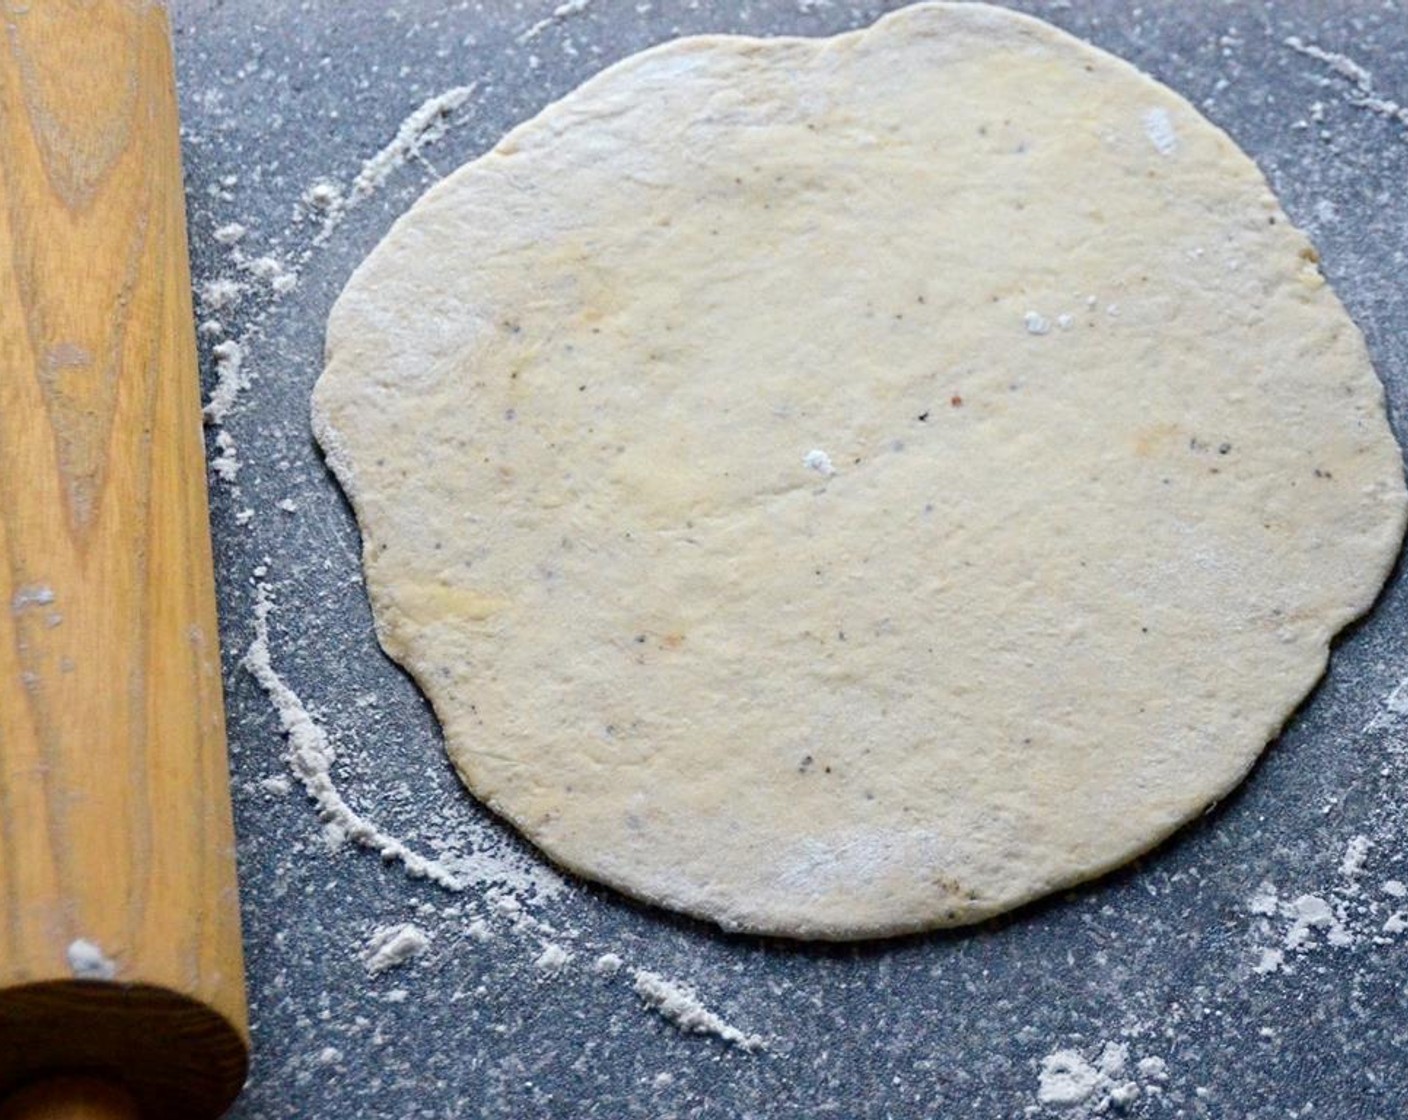 step 14 Place one ball of dough on the work surface and use a rolling pin, lightly dusted with flour to roll the dough into a disc about 1/4 - 1/3 inch thick. Set the dough onto a baking sheet and continue rolling out the other balls of dough.